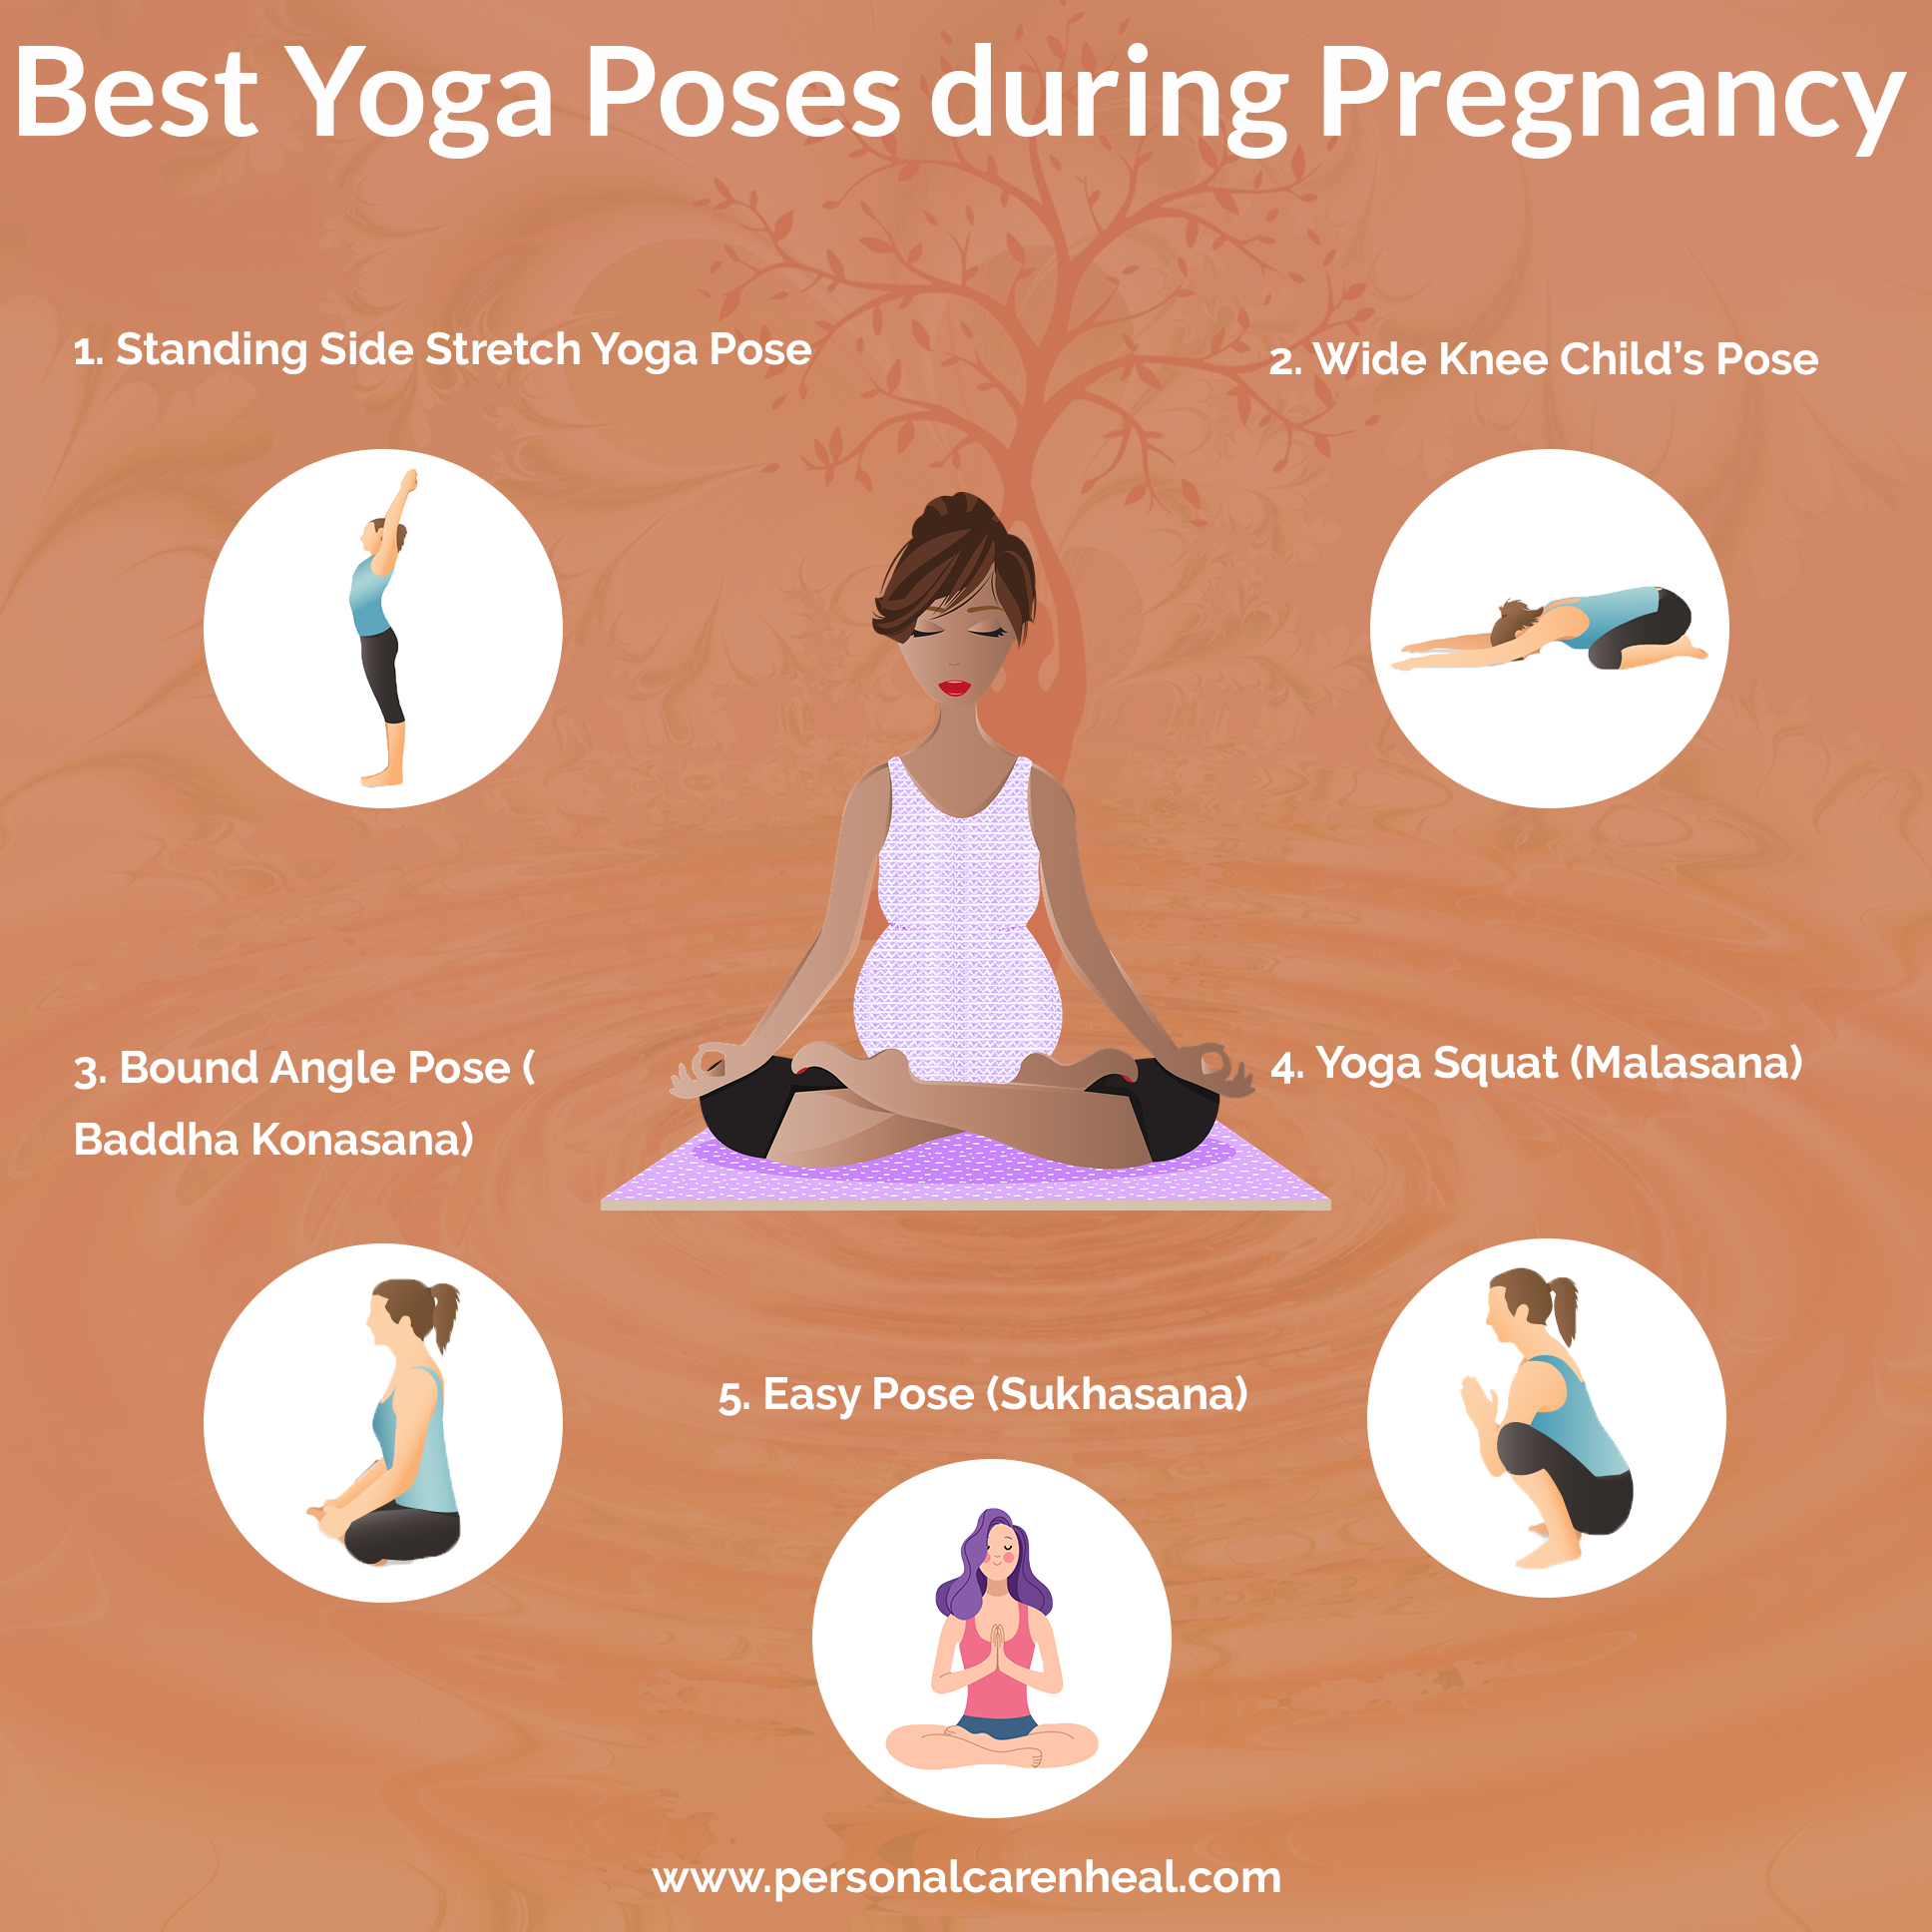 Prenatal Yoga Poses To Avoid For A Safe Childbearing - Sweatbox